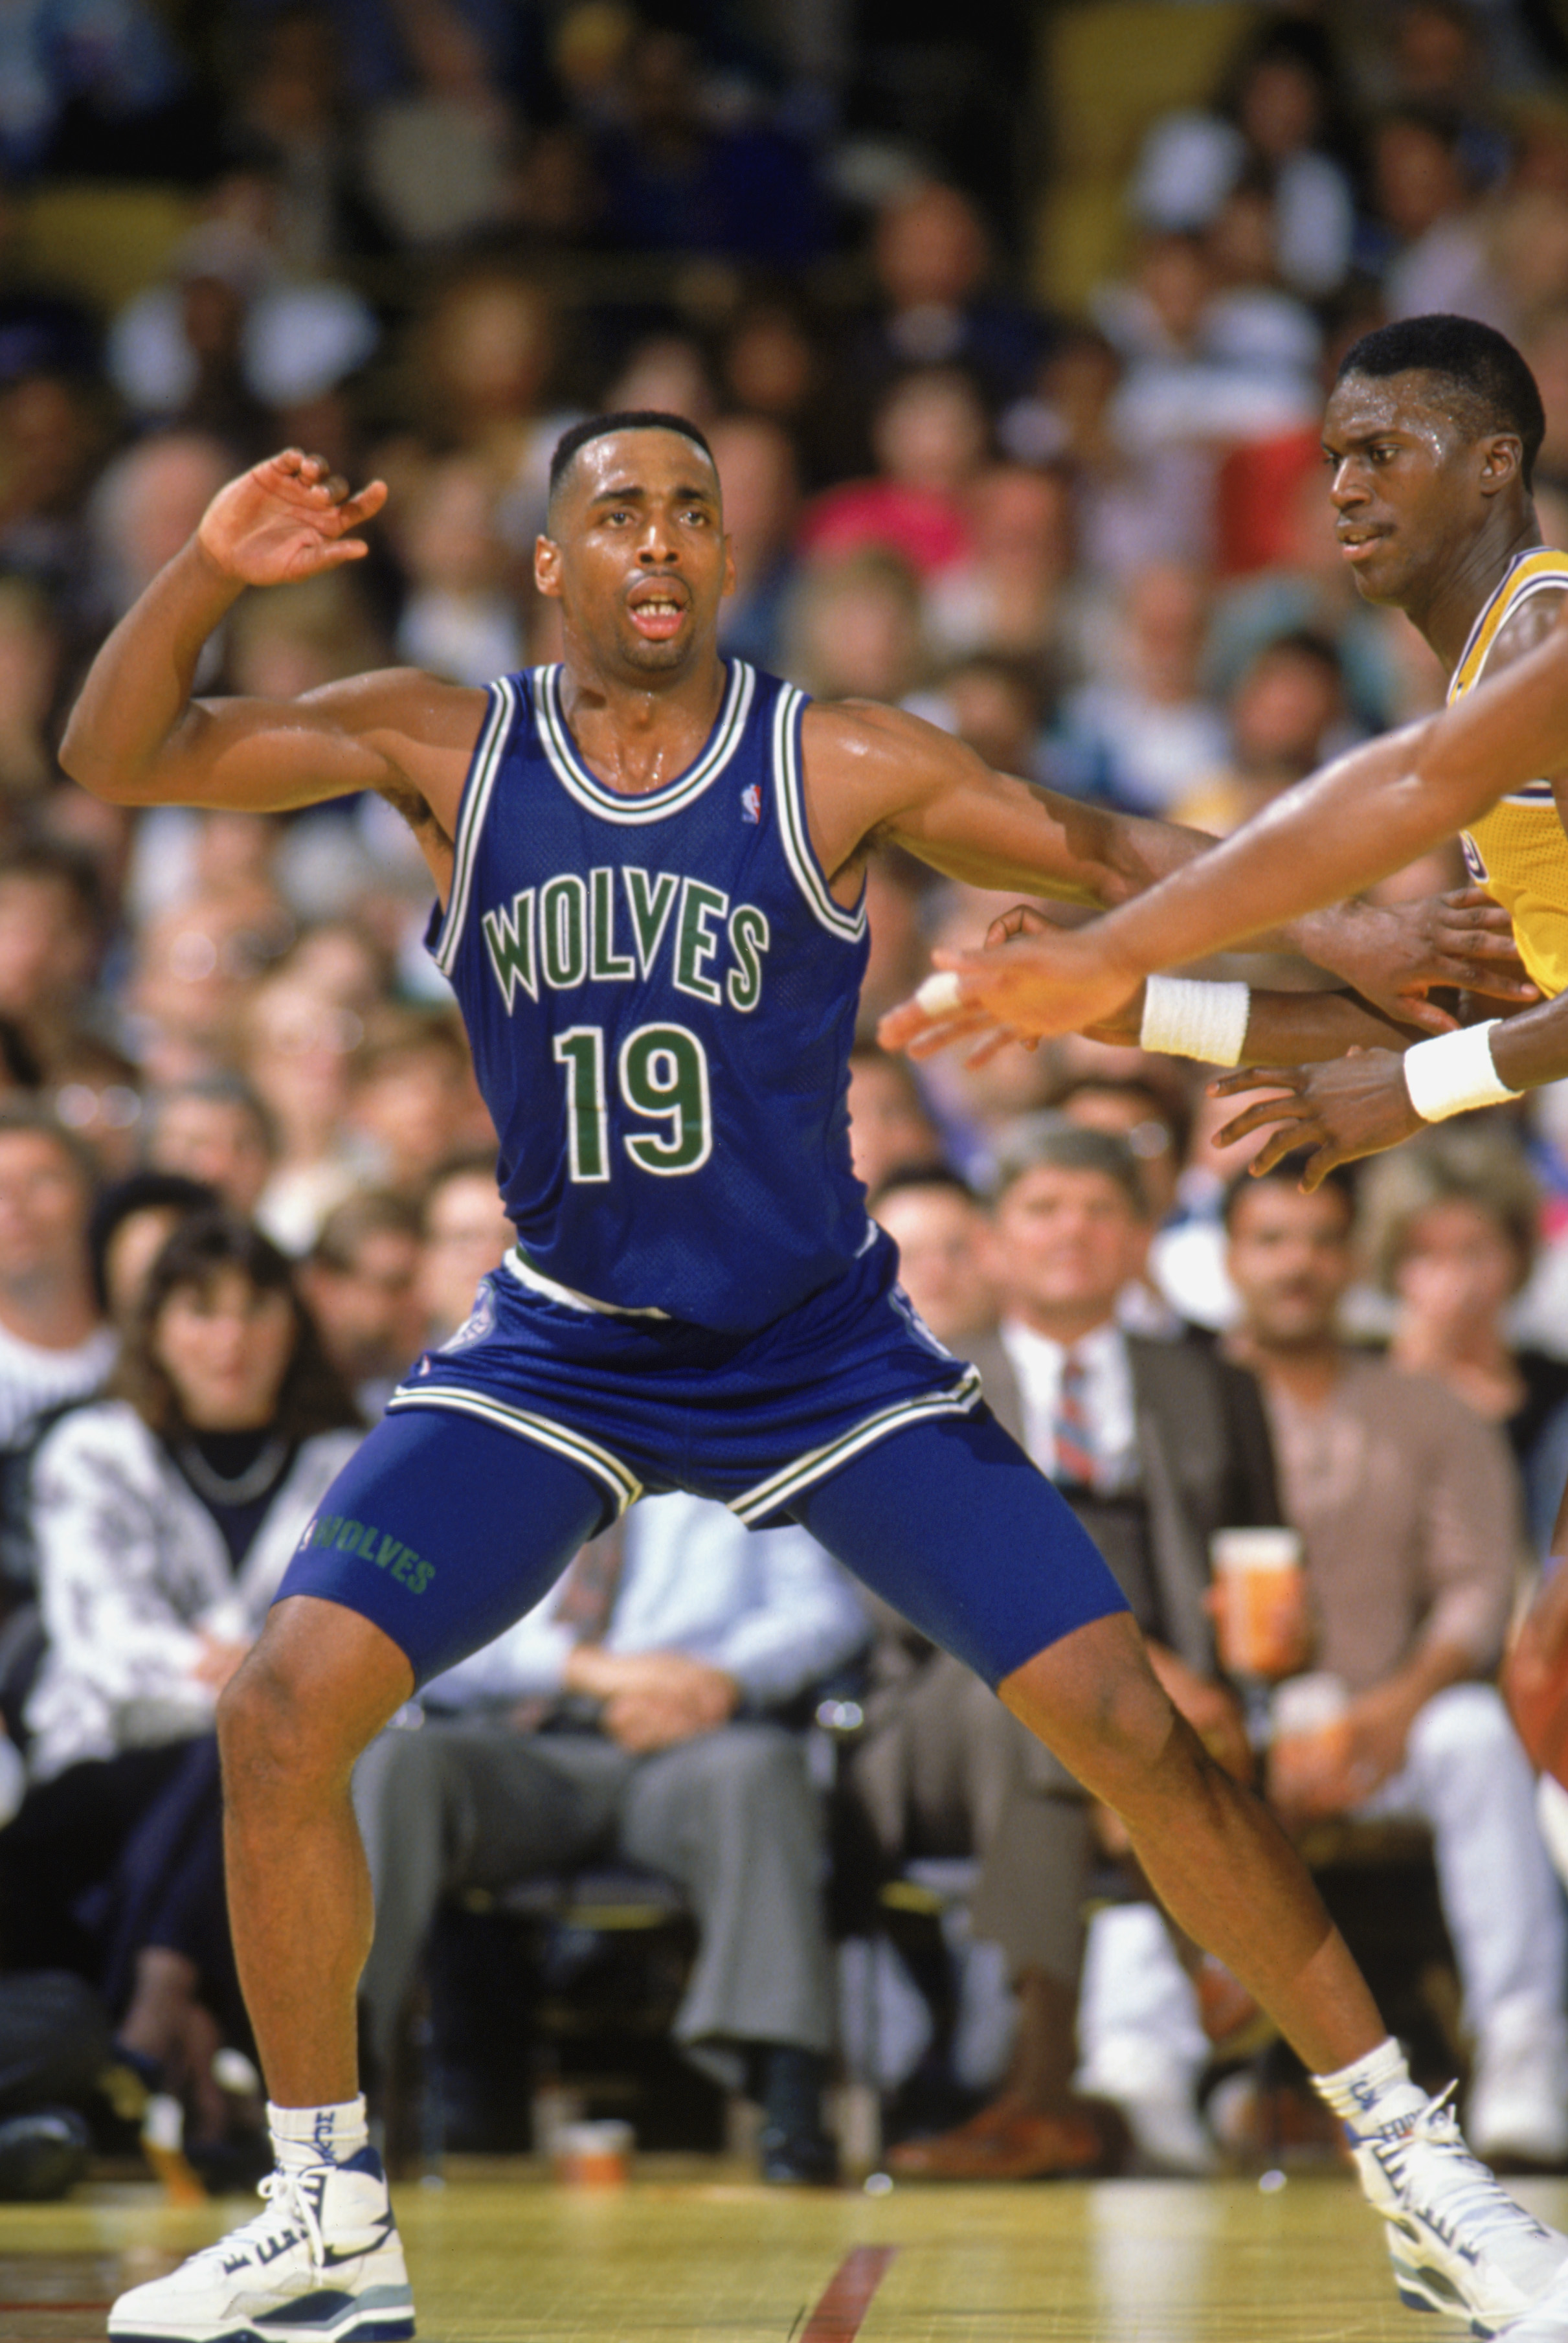 LOS ANGELES - 1990:  Tony Campbell #19 of the Minnesota Timberwolves calls for the ball during a game against the Los Angeles Lakers at the Great Western Forum in Los Angeles, California during the 1989-1990 NBA season.  (Photo by Mike Powell/Getty Images